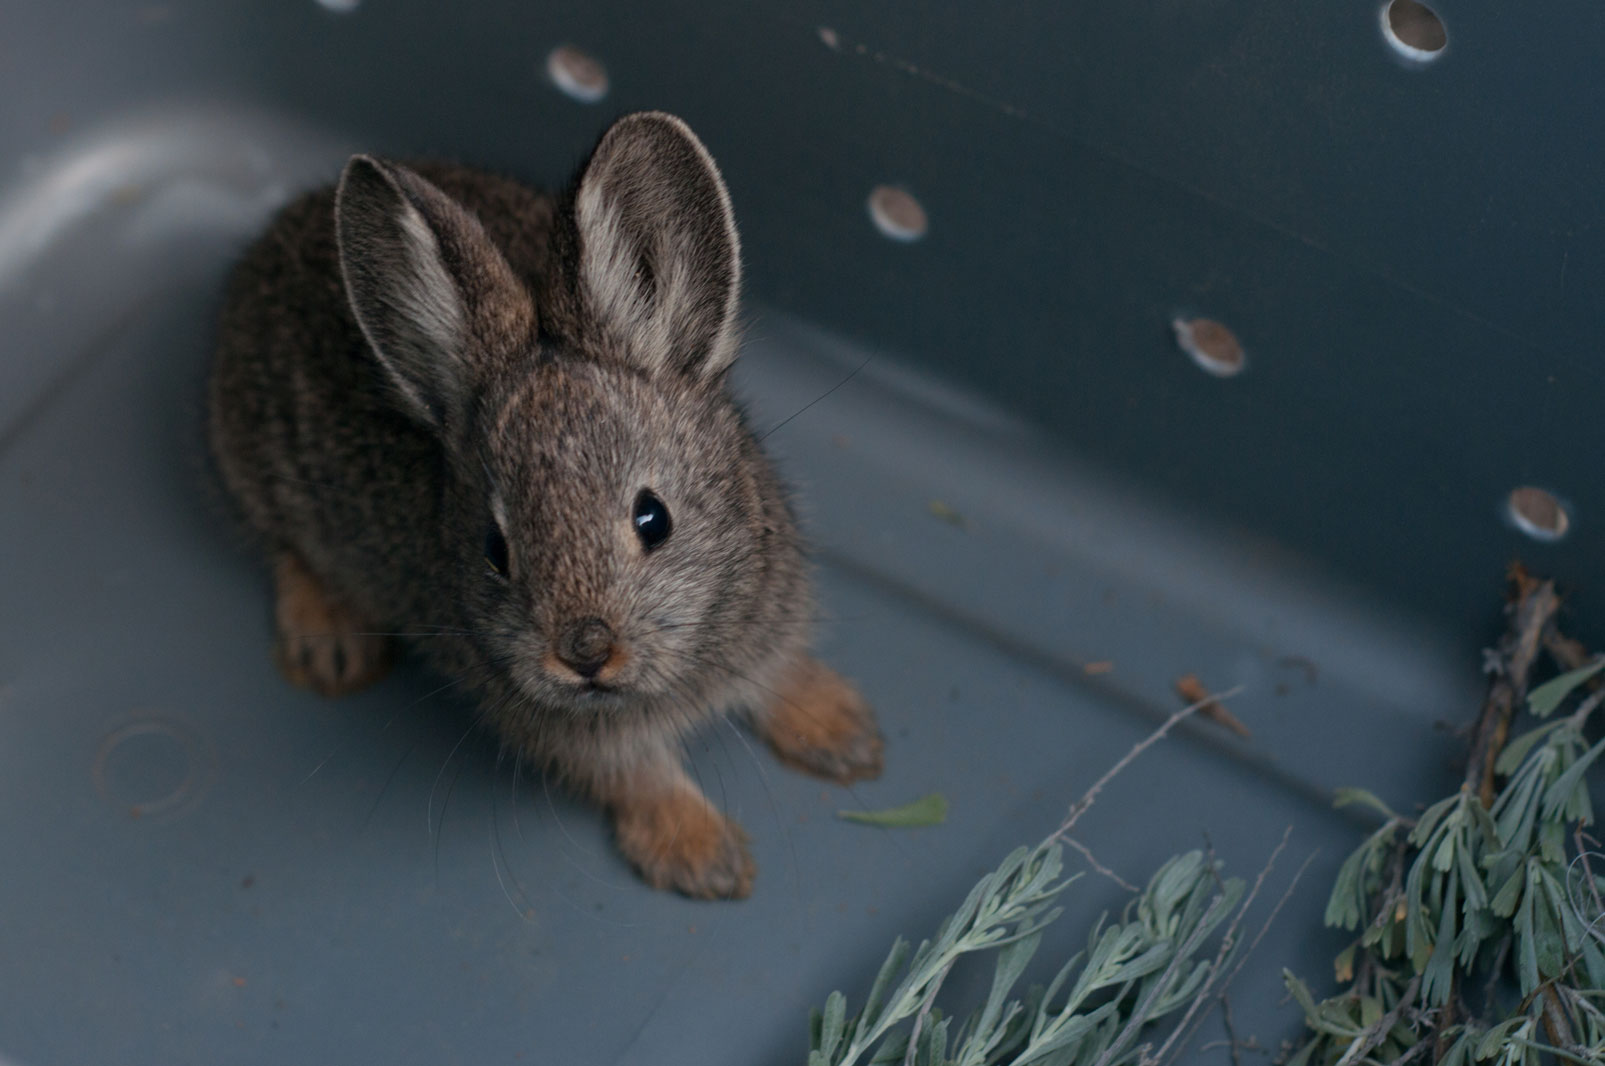 Due to habitat fragmentation, fewer than 30 Columbia Basin pygmy rabbits remained in the wild in 2003, according to a survey. Photo © Hannah Letinich